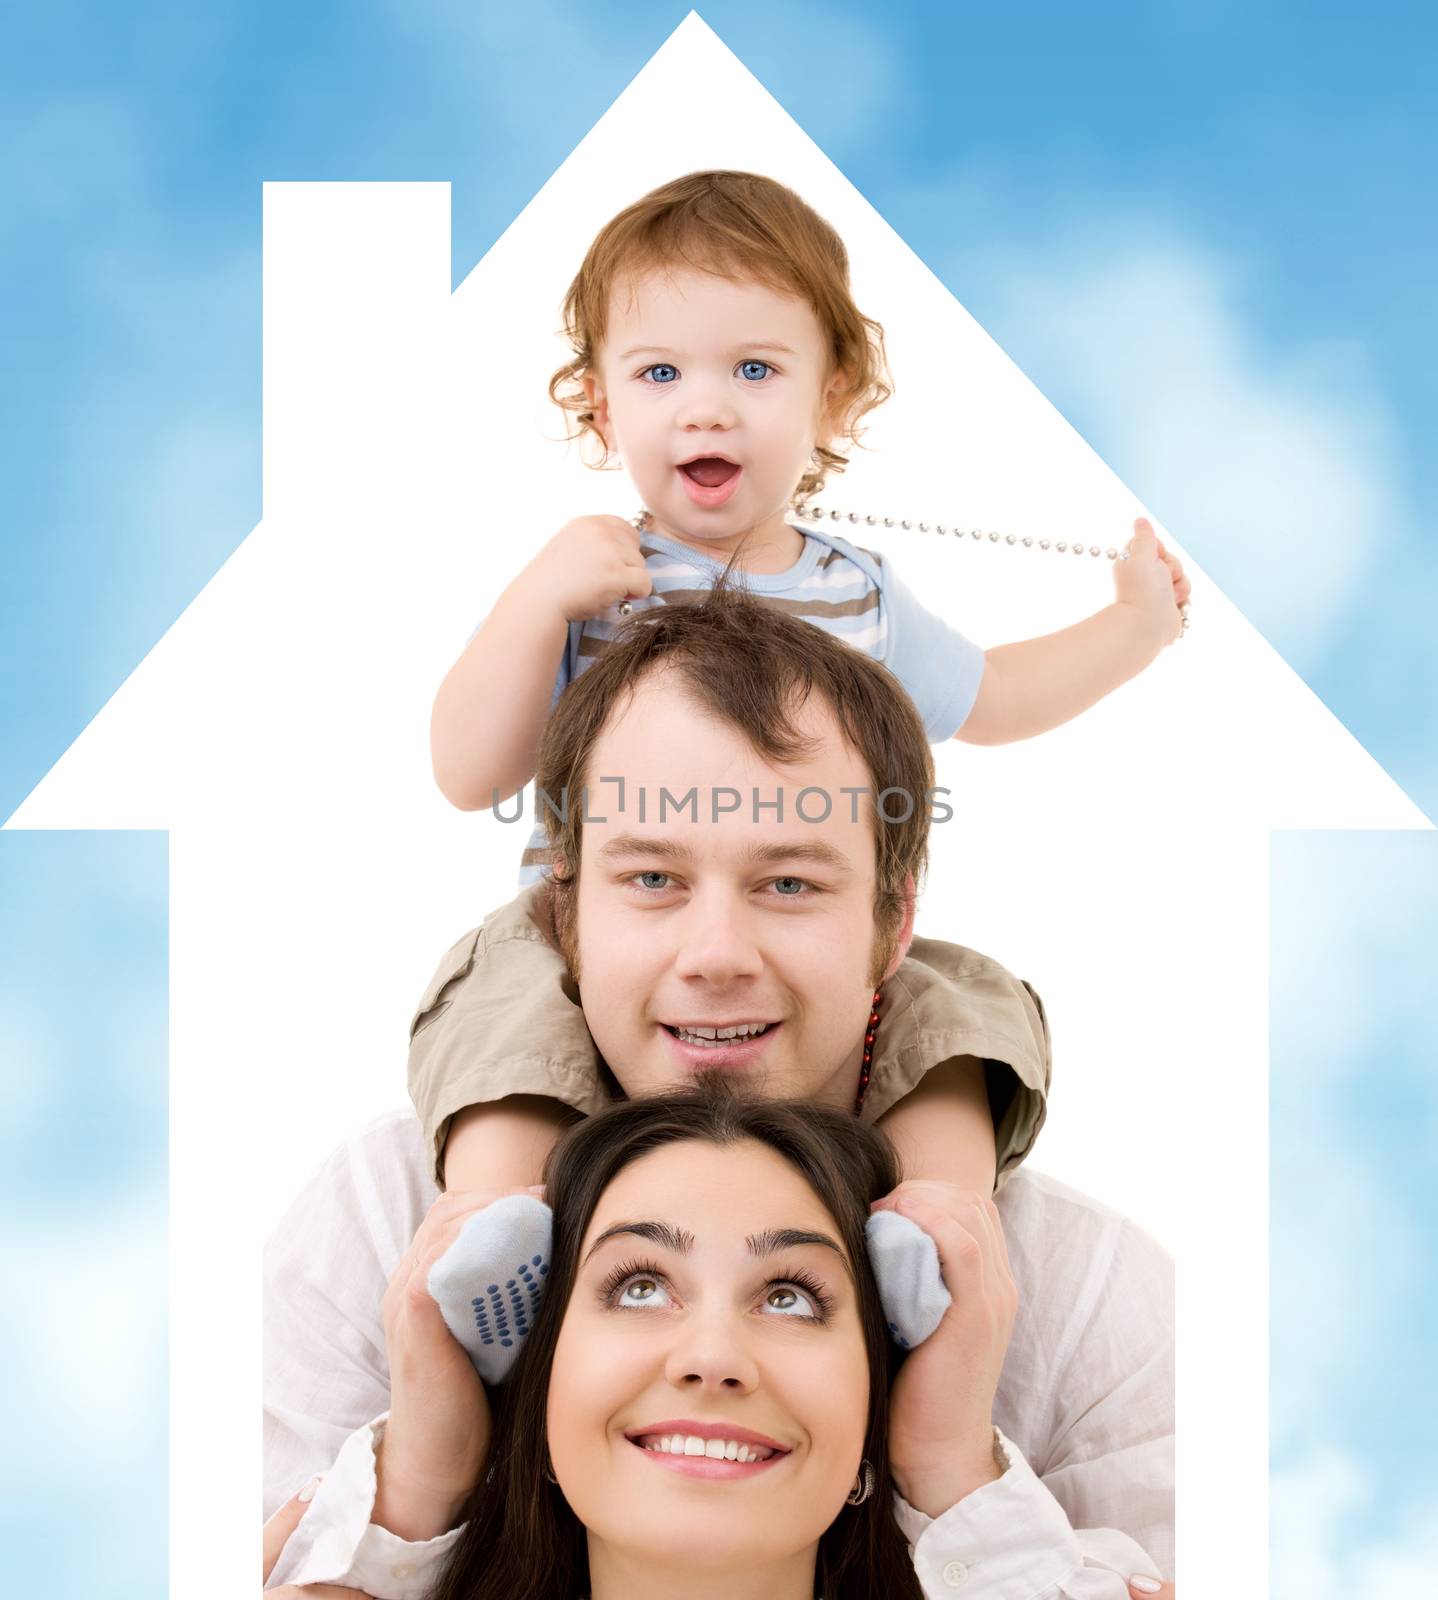 bright picture of happy family over house symbol and blue sky